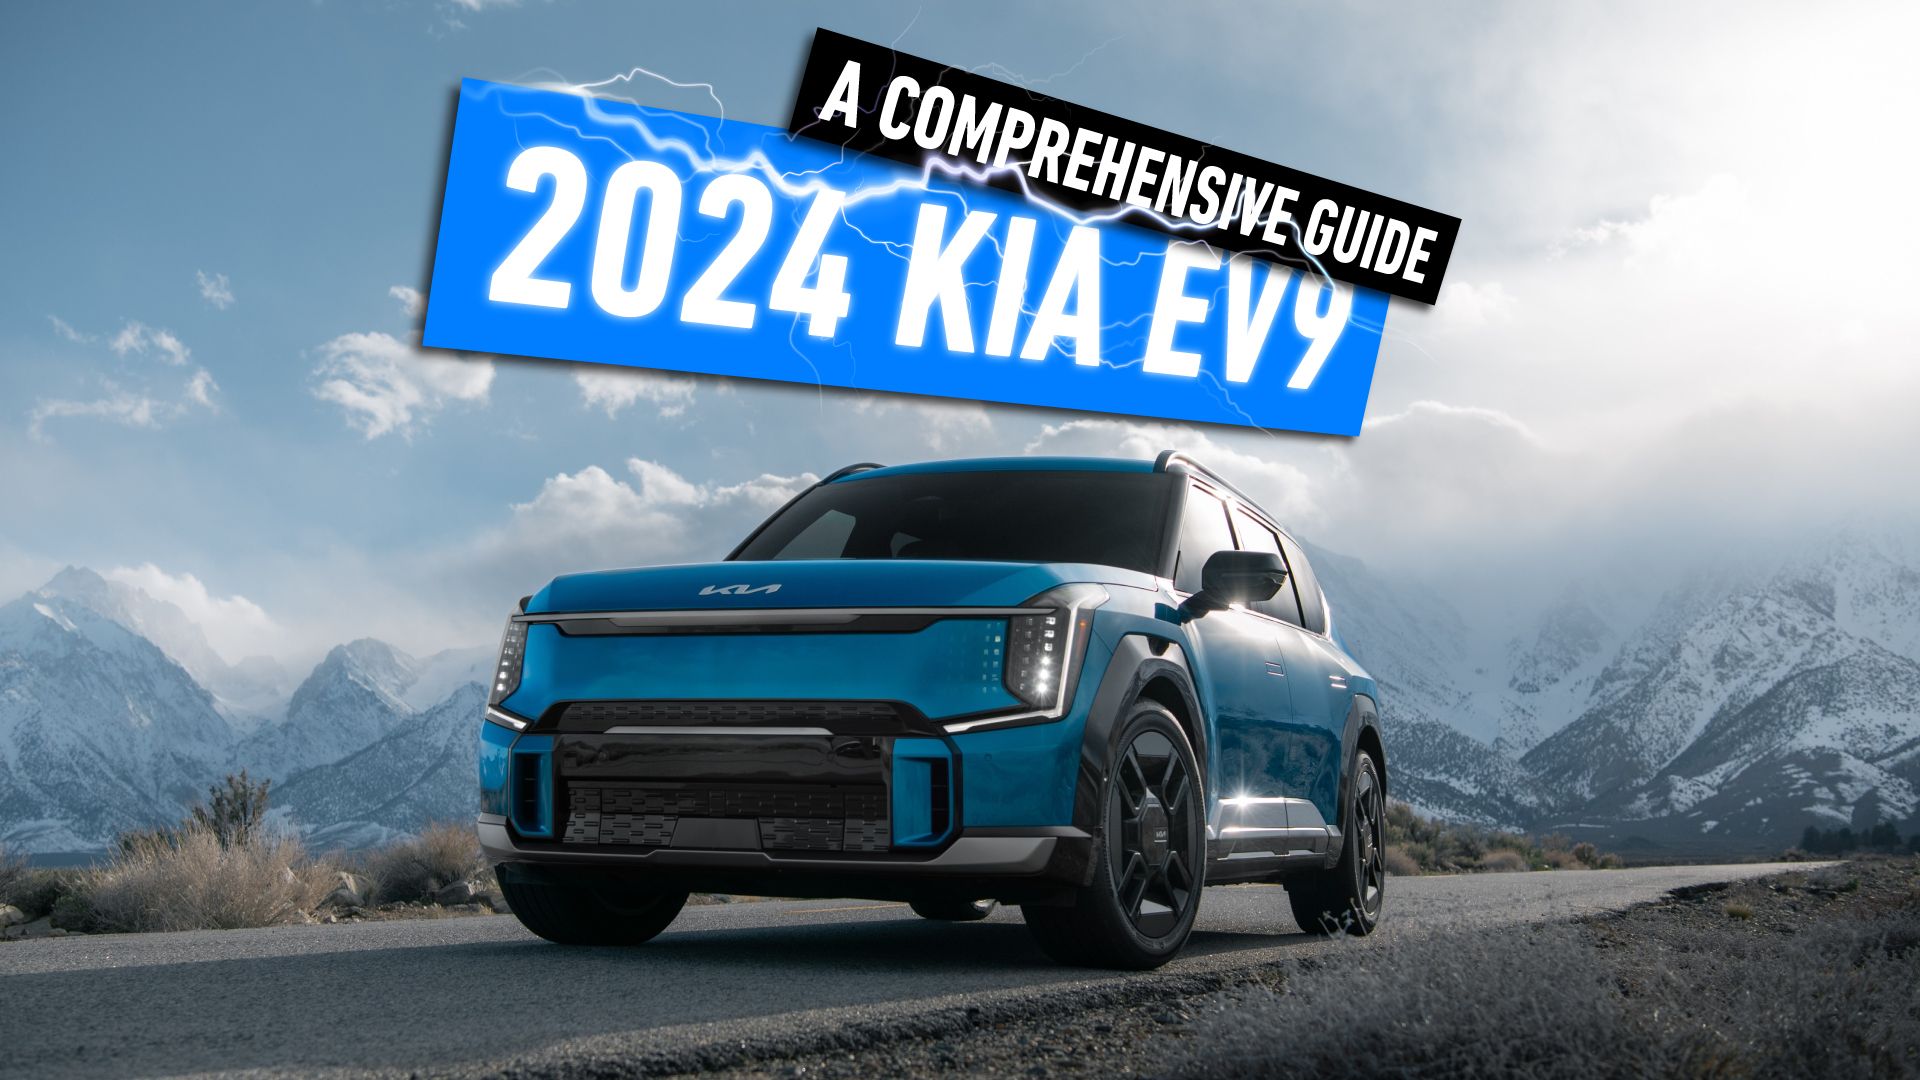 2024 Kia EV9: A Comprehensive Guide On Features, Specs, And Pricing